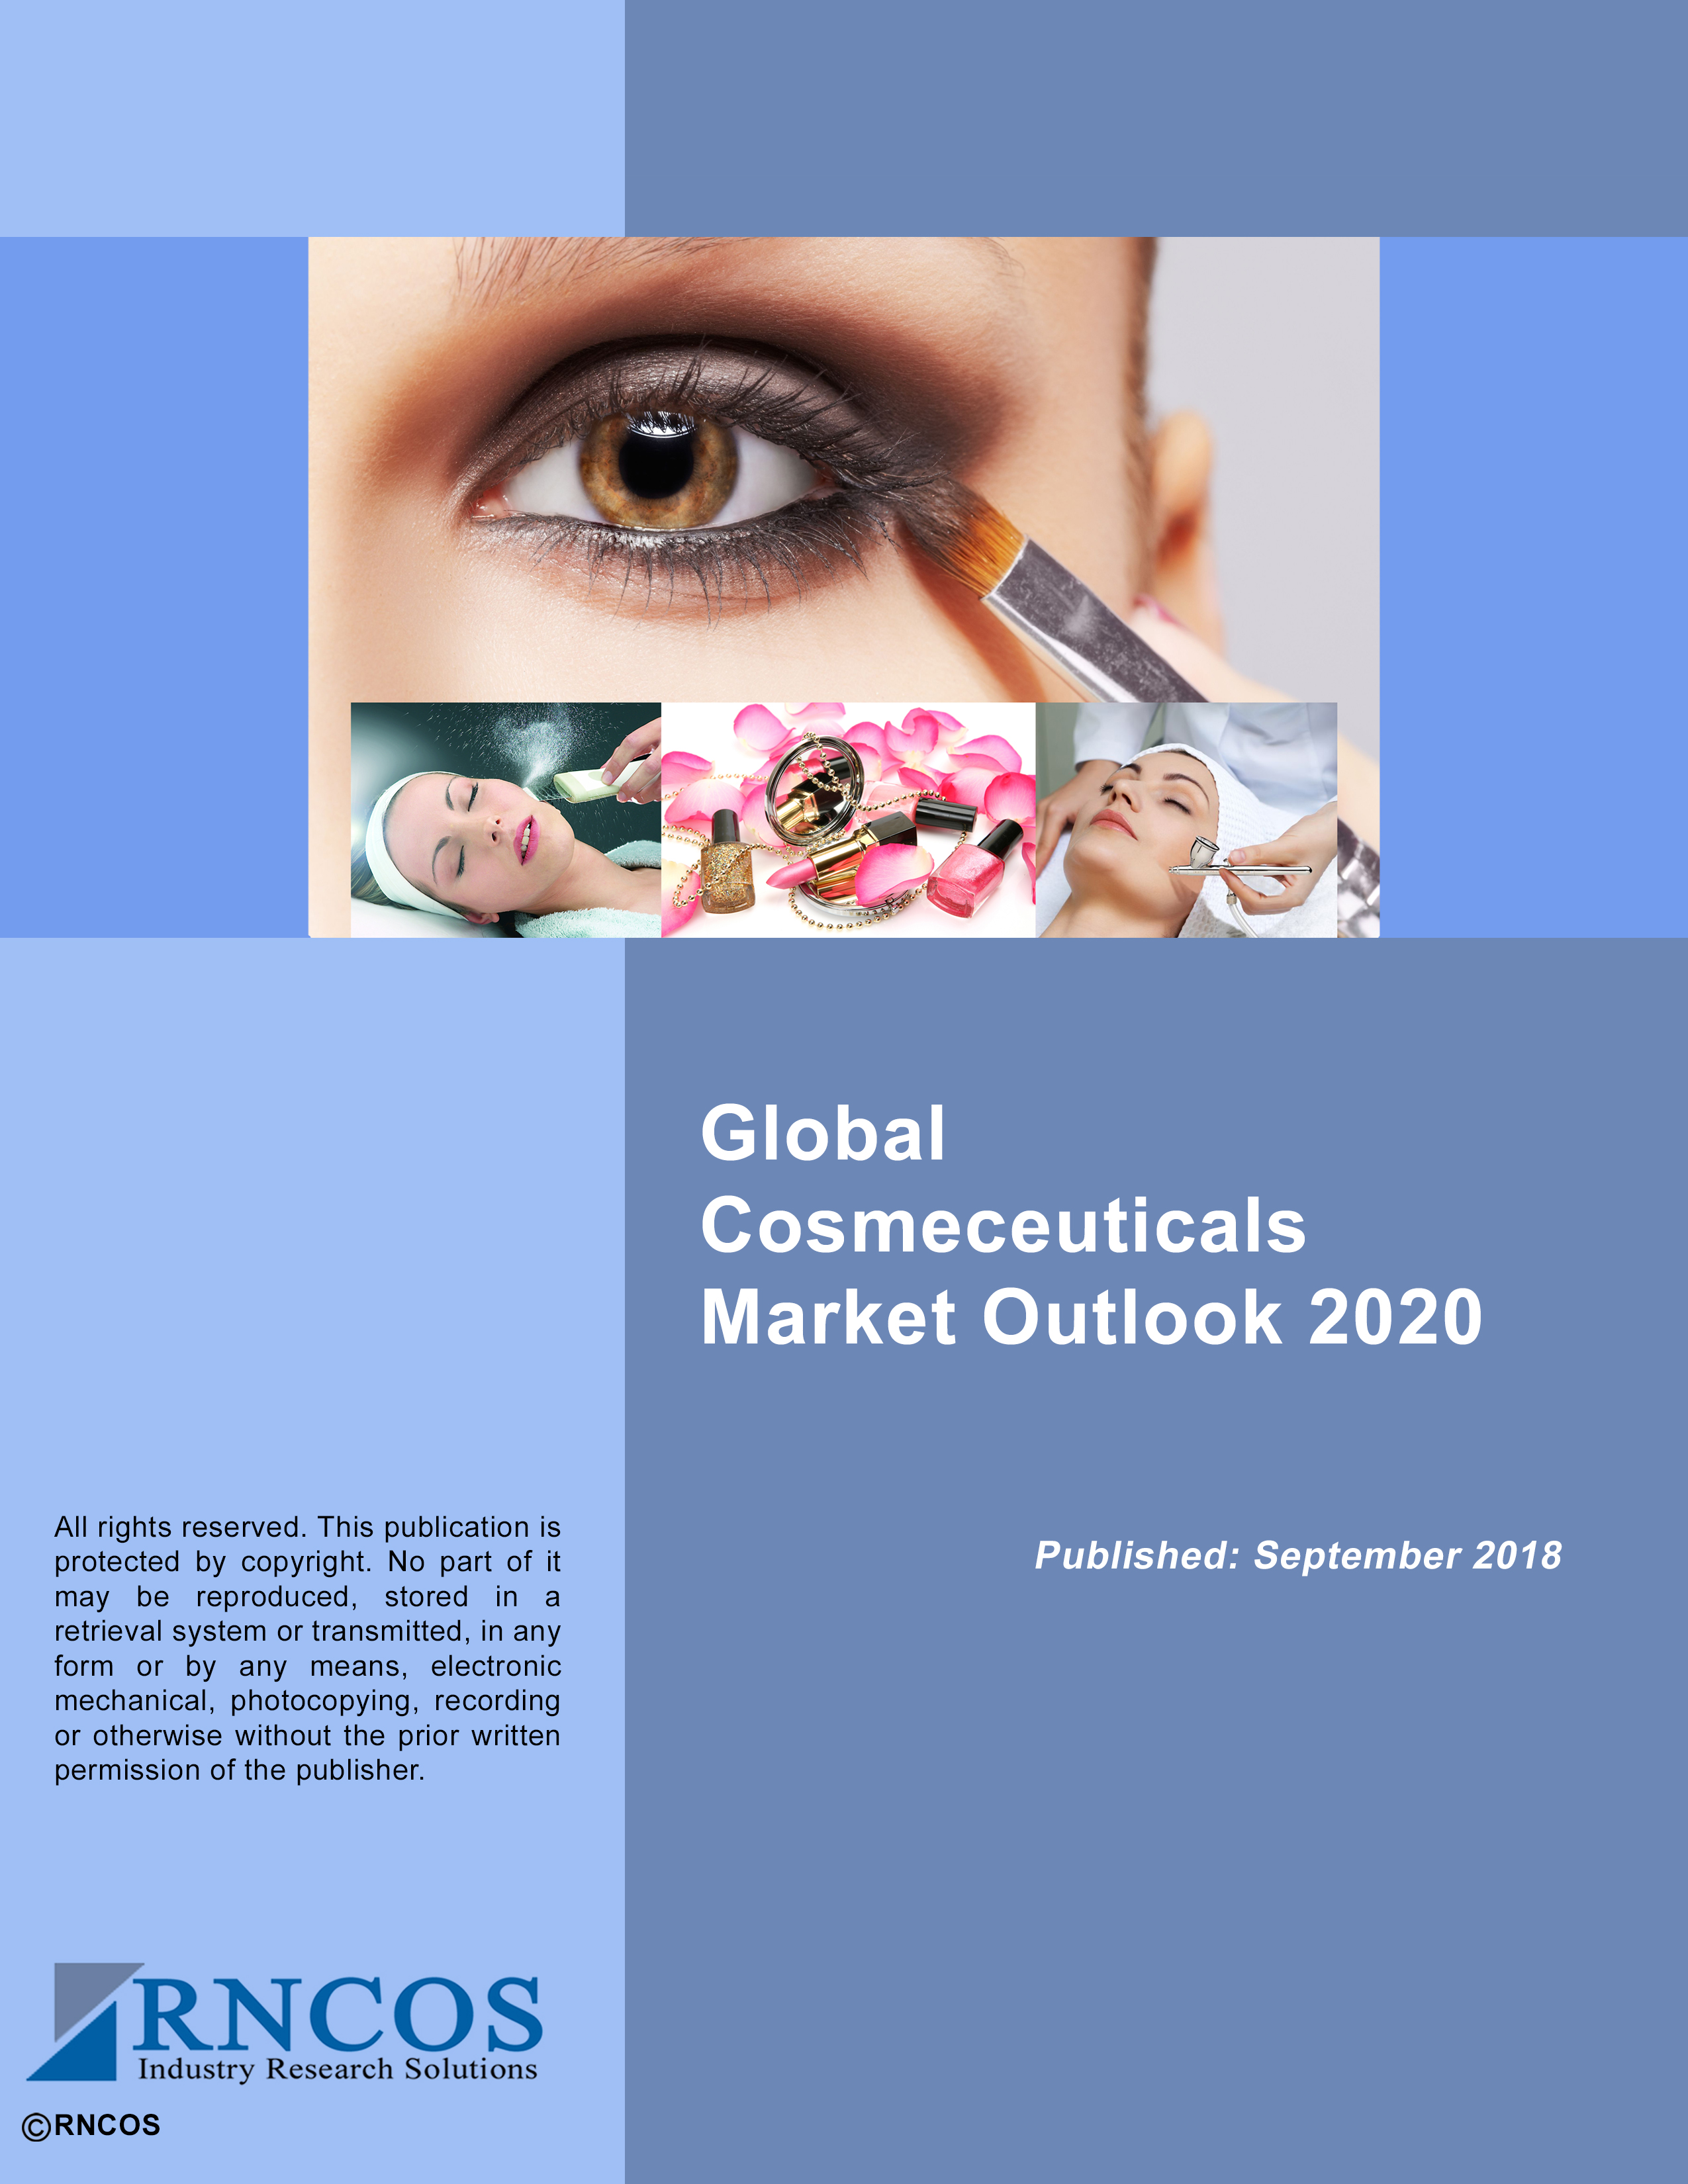 Global Cosmeceuticals Market Outlook 2022 Research Report